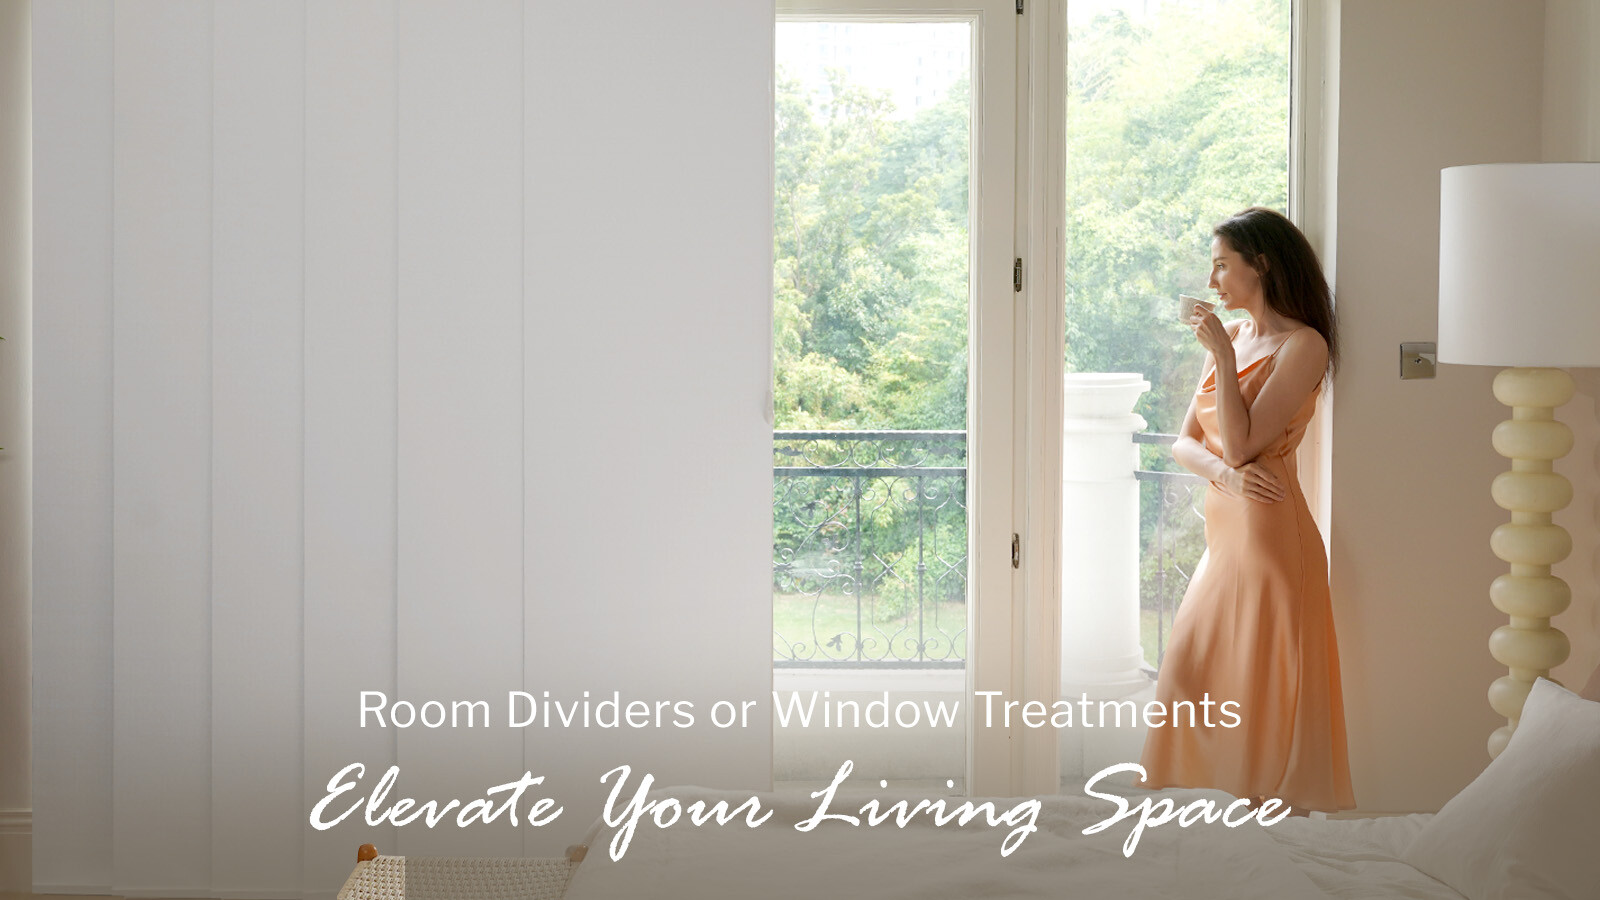 Room Dividers or Window Treatments, Elevate Your Living Space